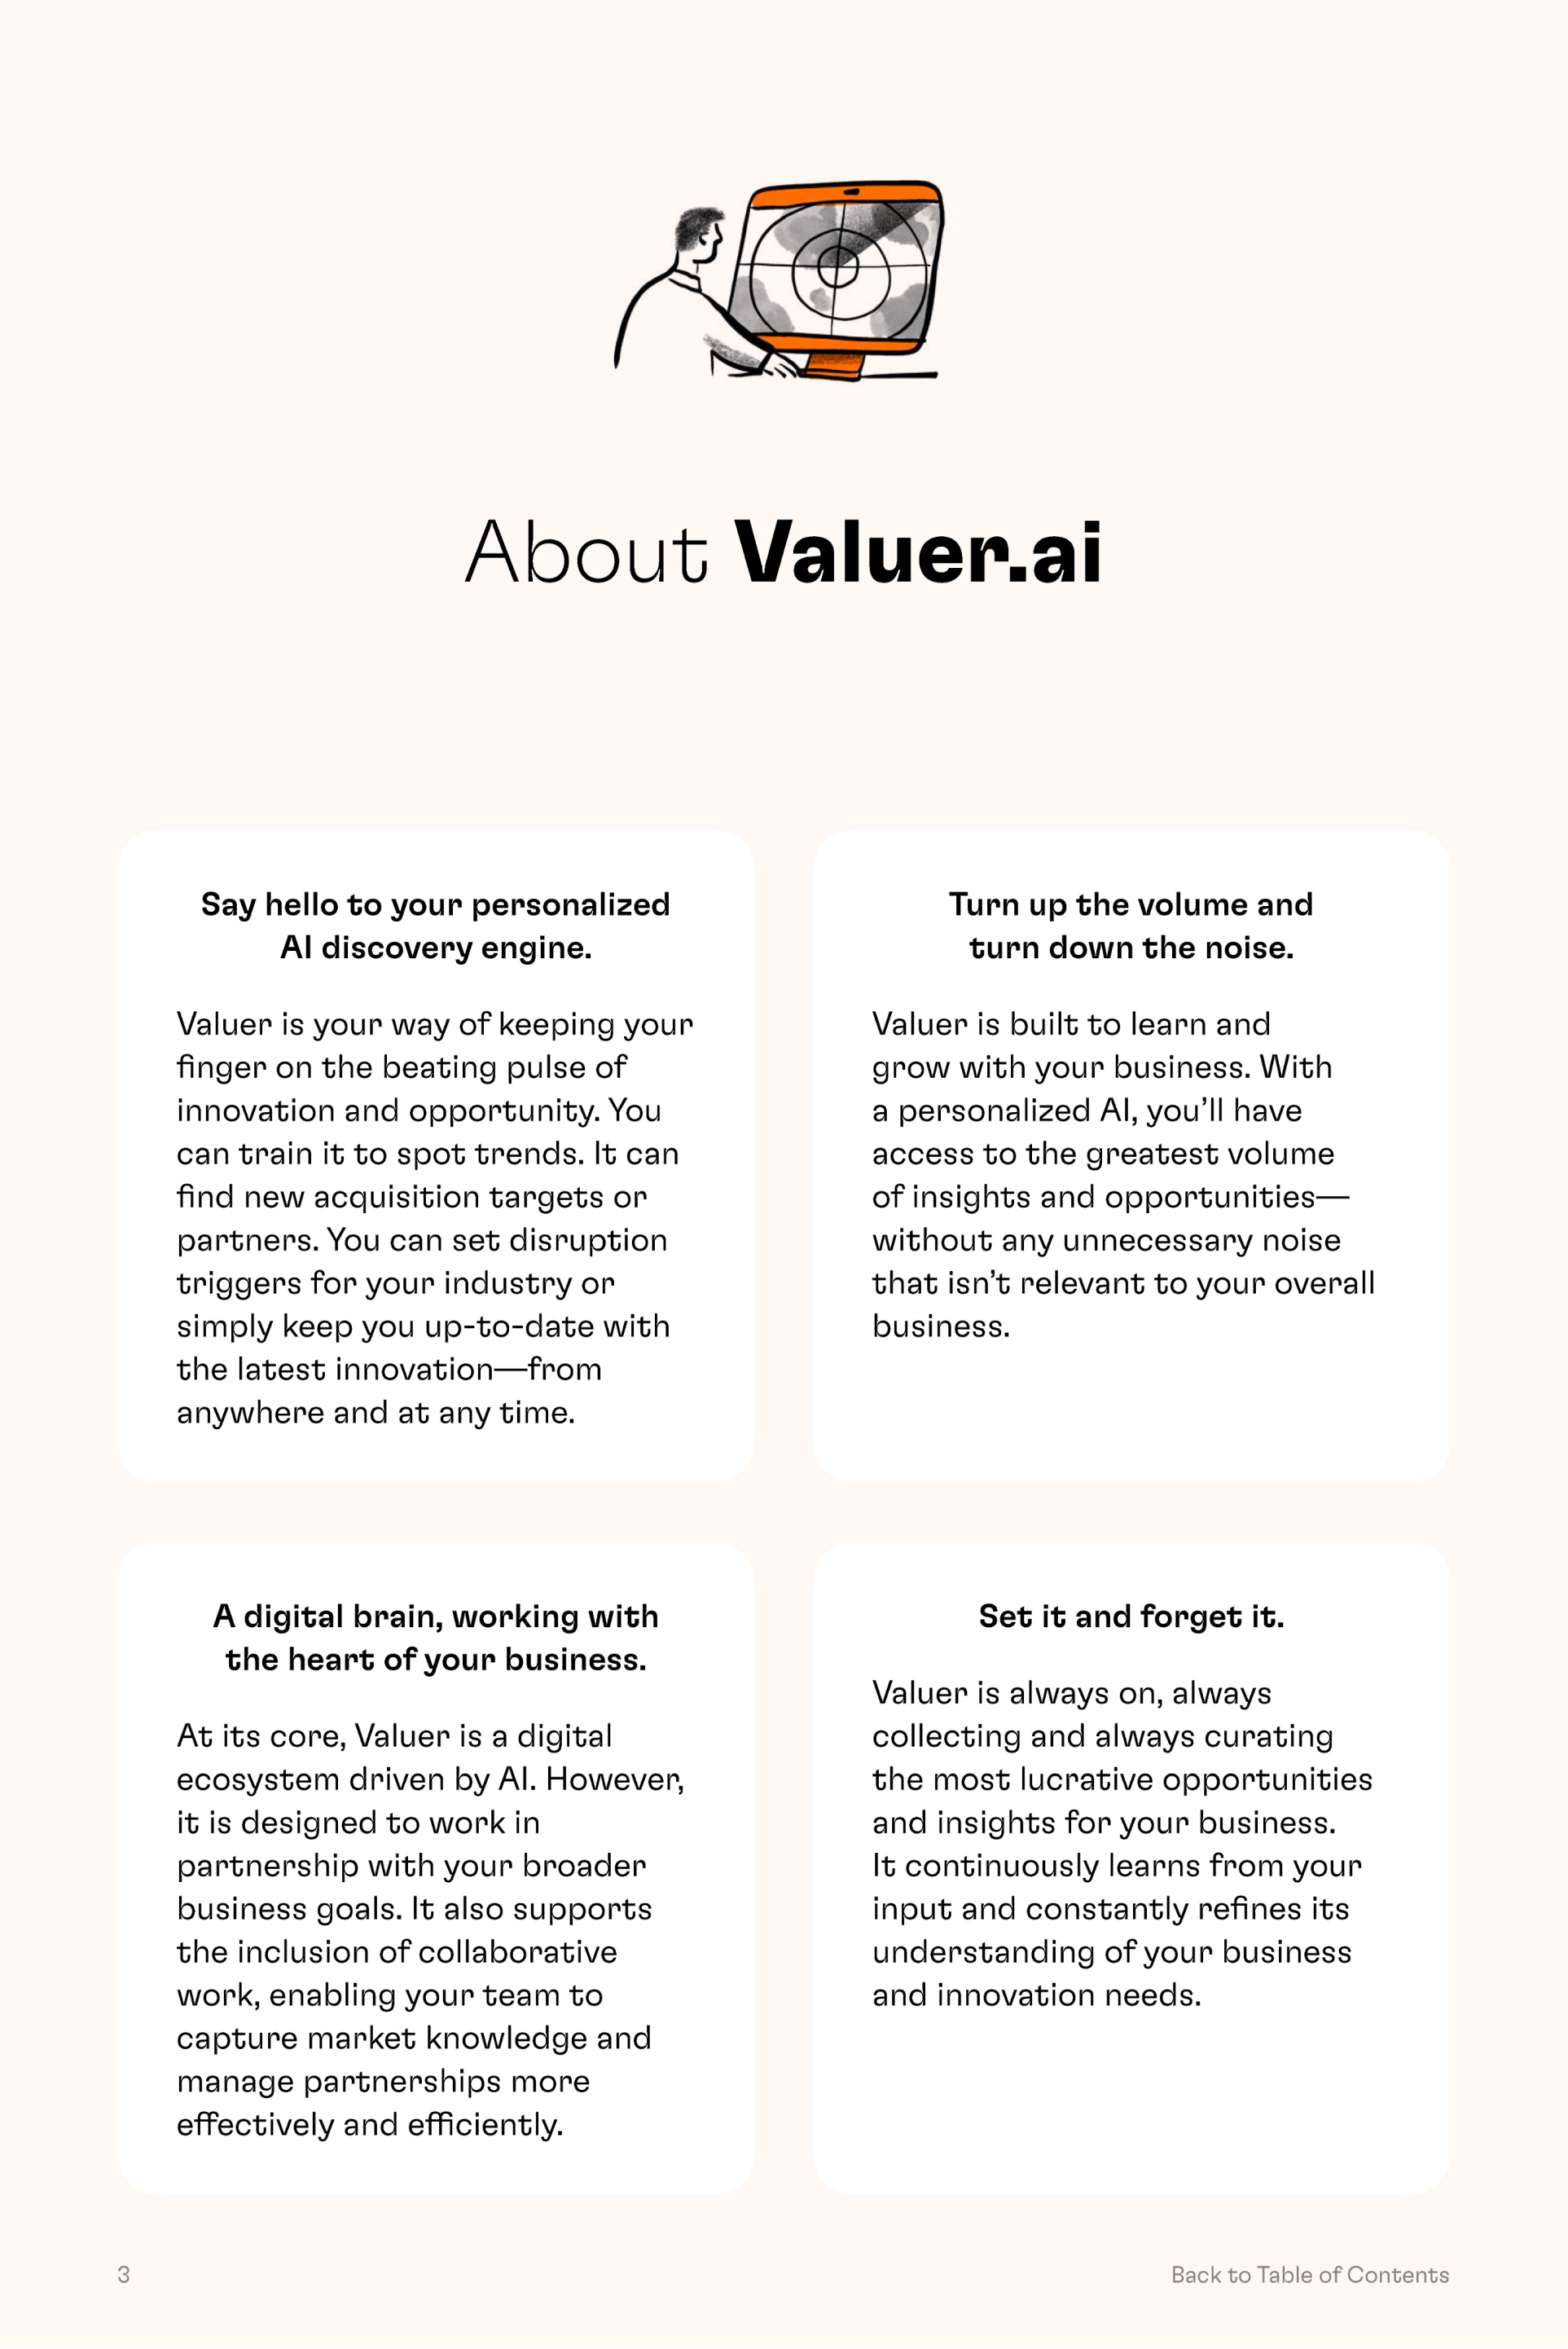 Look Inside 2 about Valuer